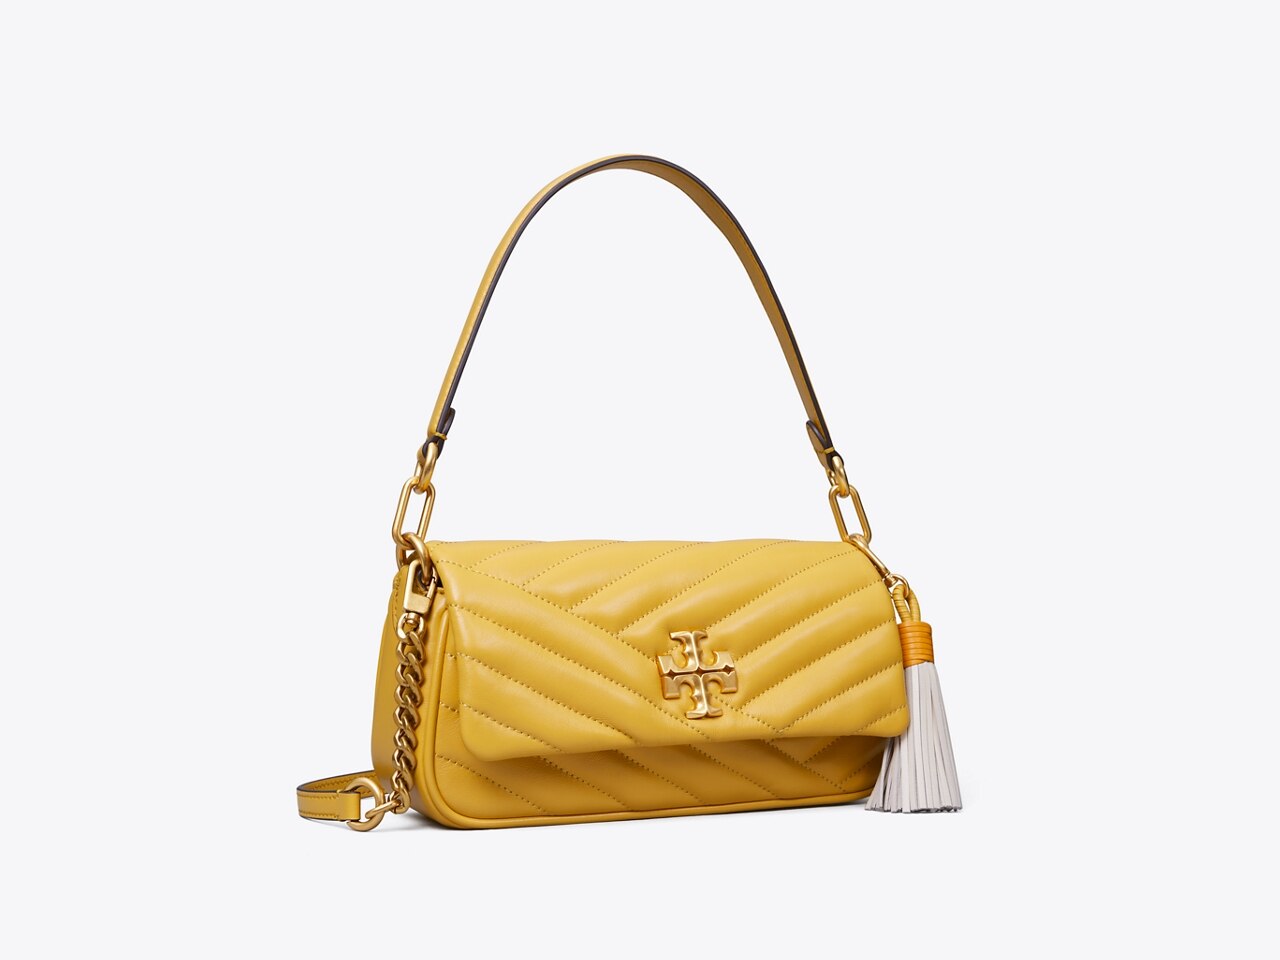 Tory Burch Small Kira Chevron Leather Shoulder Bag In Dusty Almond/rolled  Gold